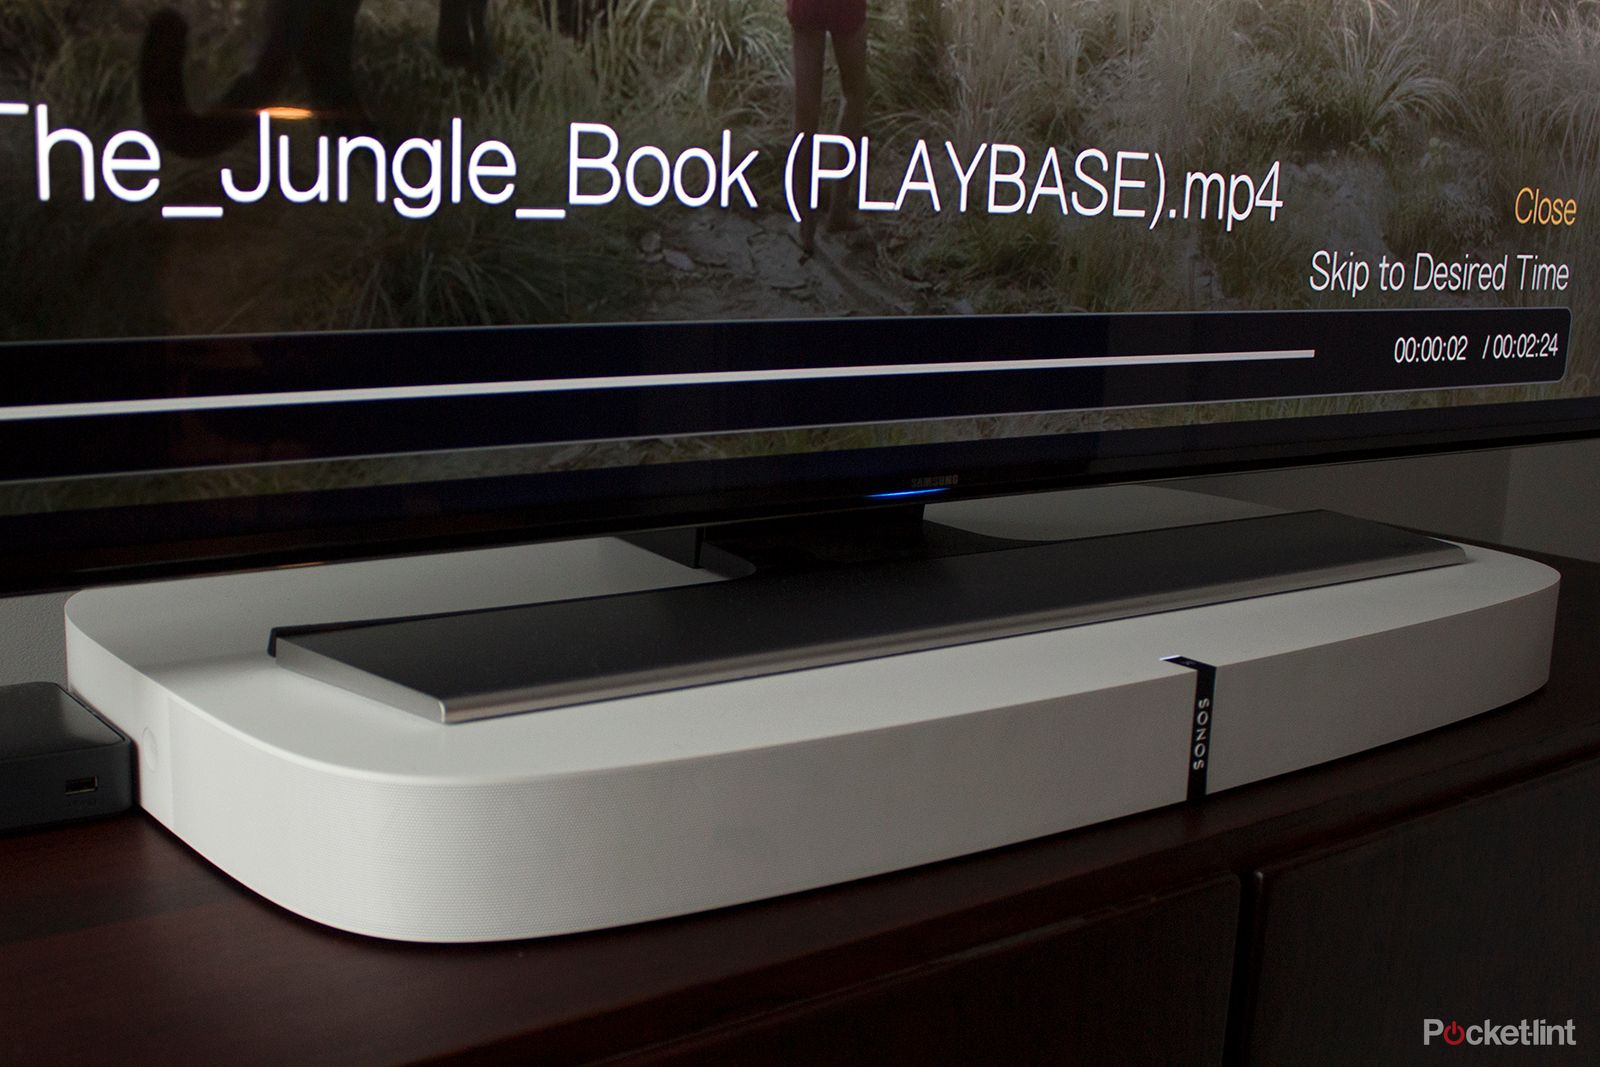 sonos playbase review image 3